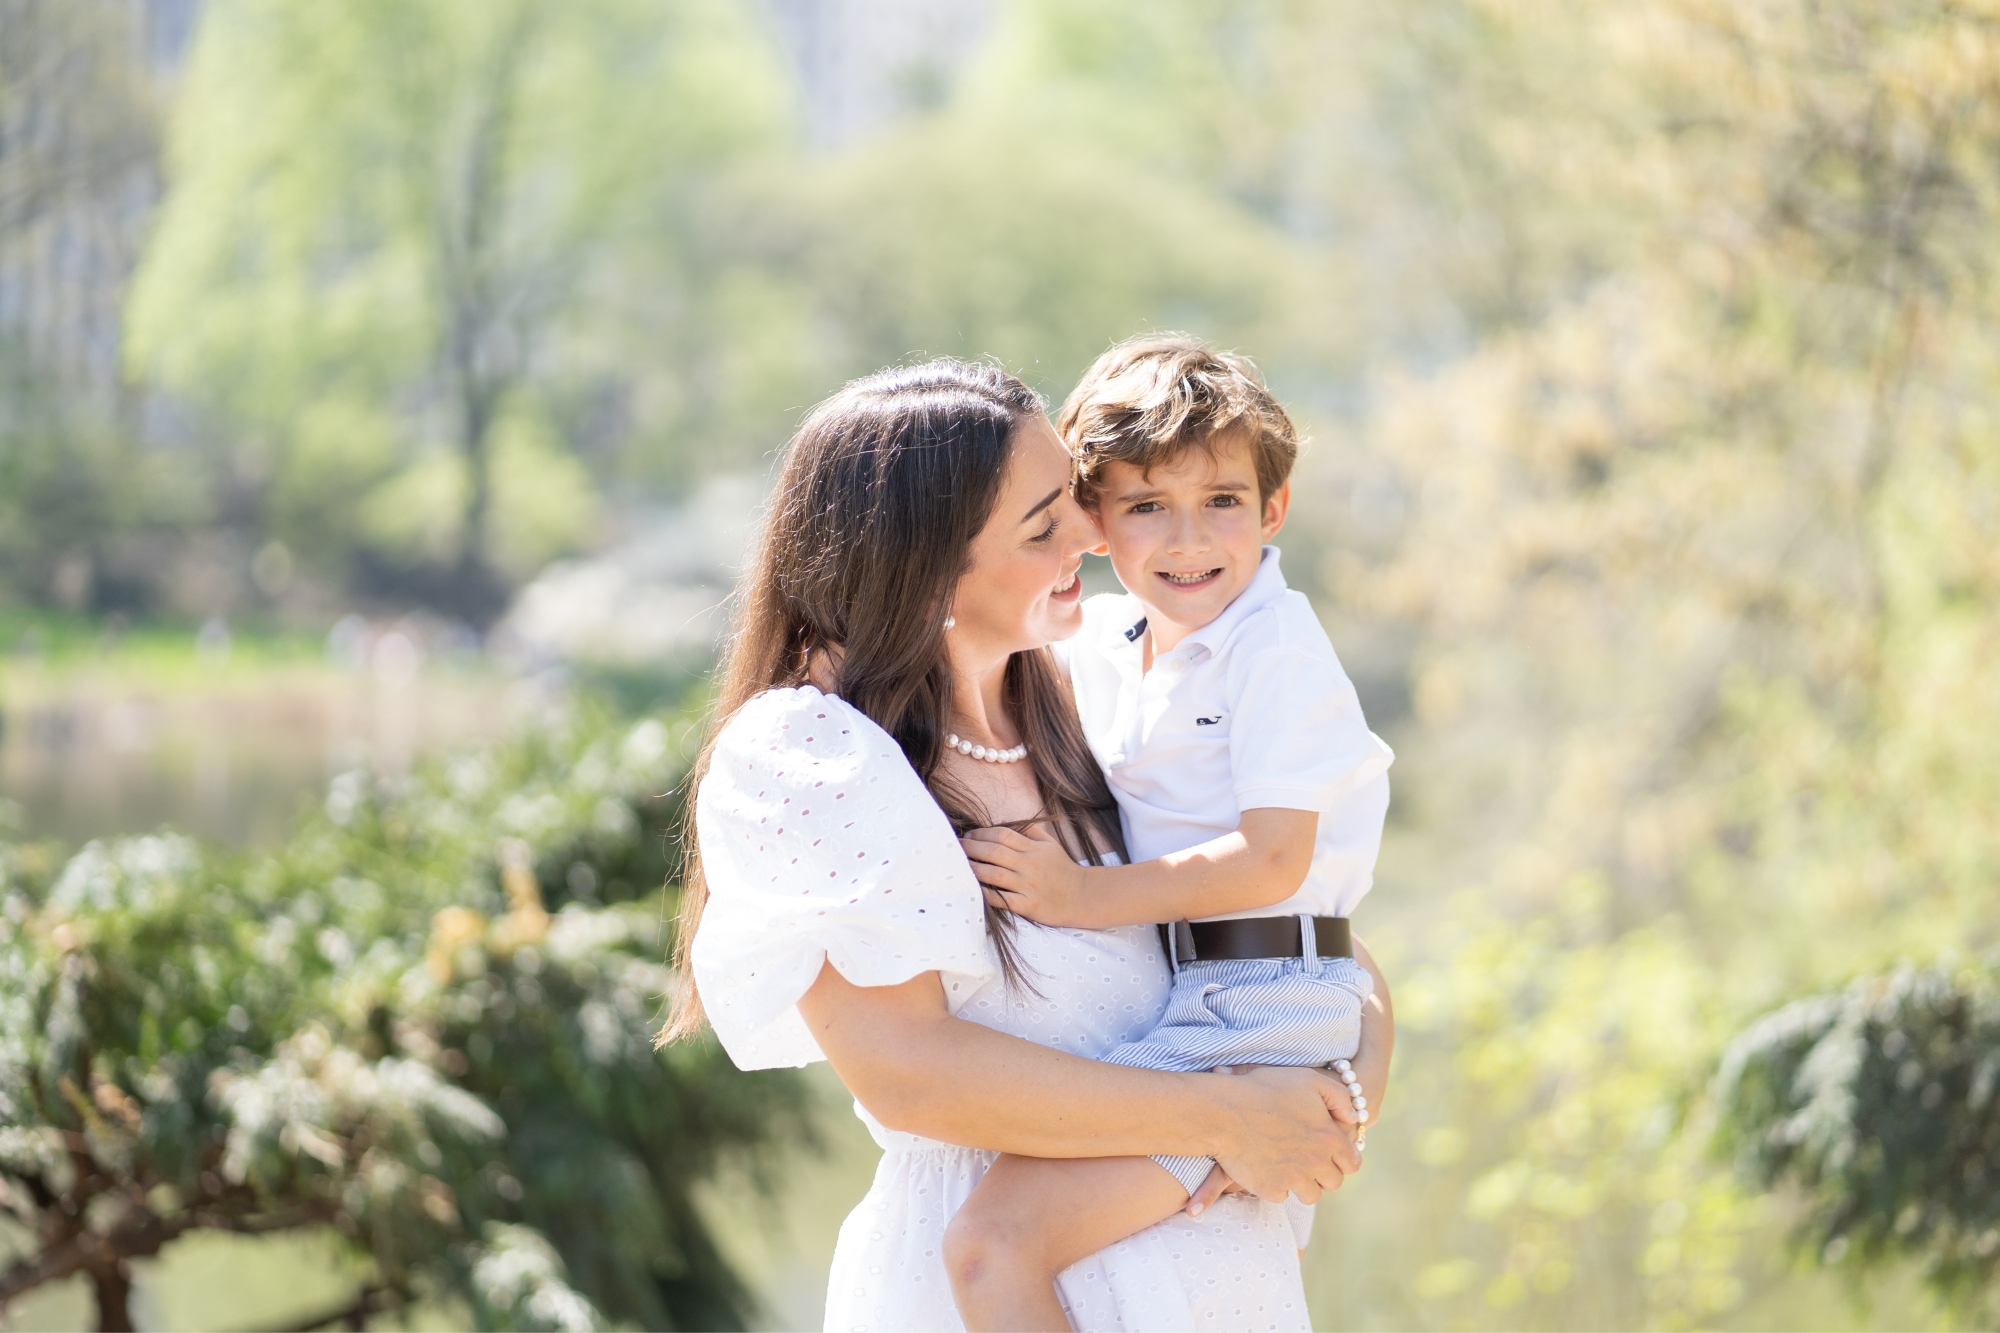 mom and son photography ideas